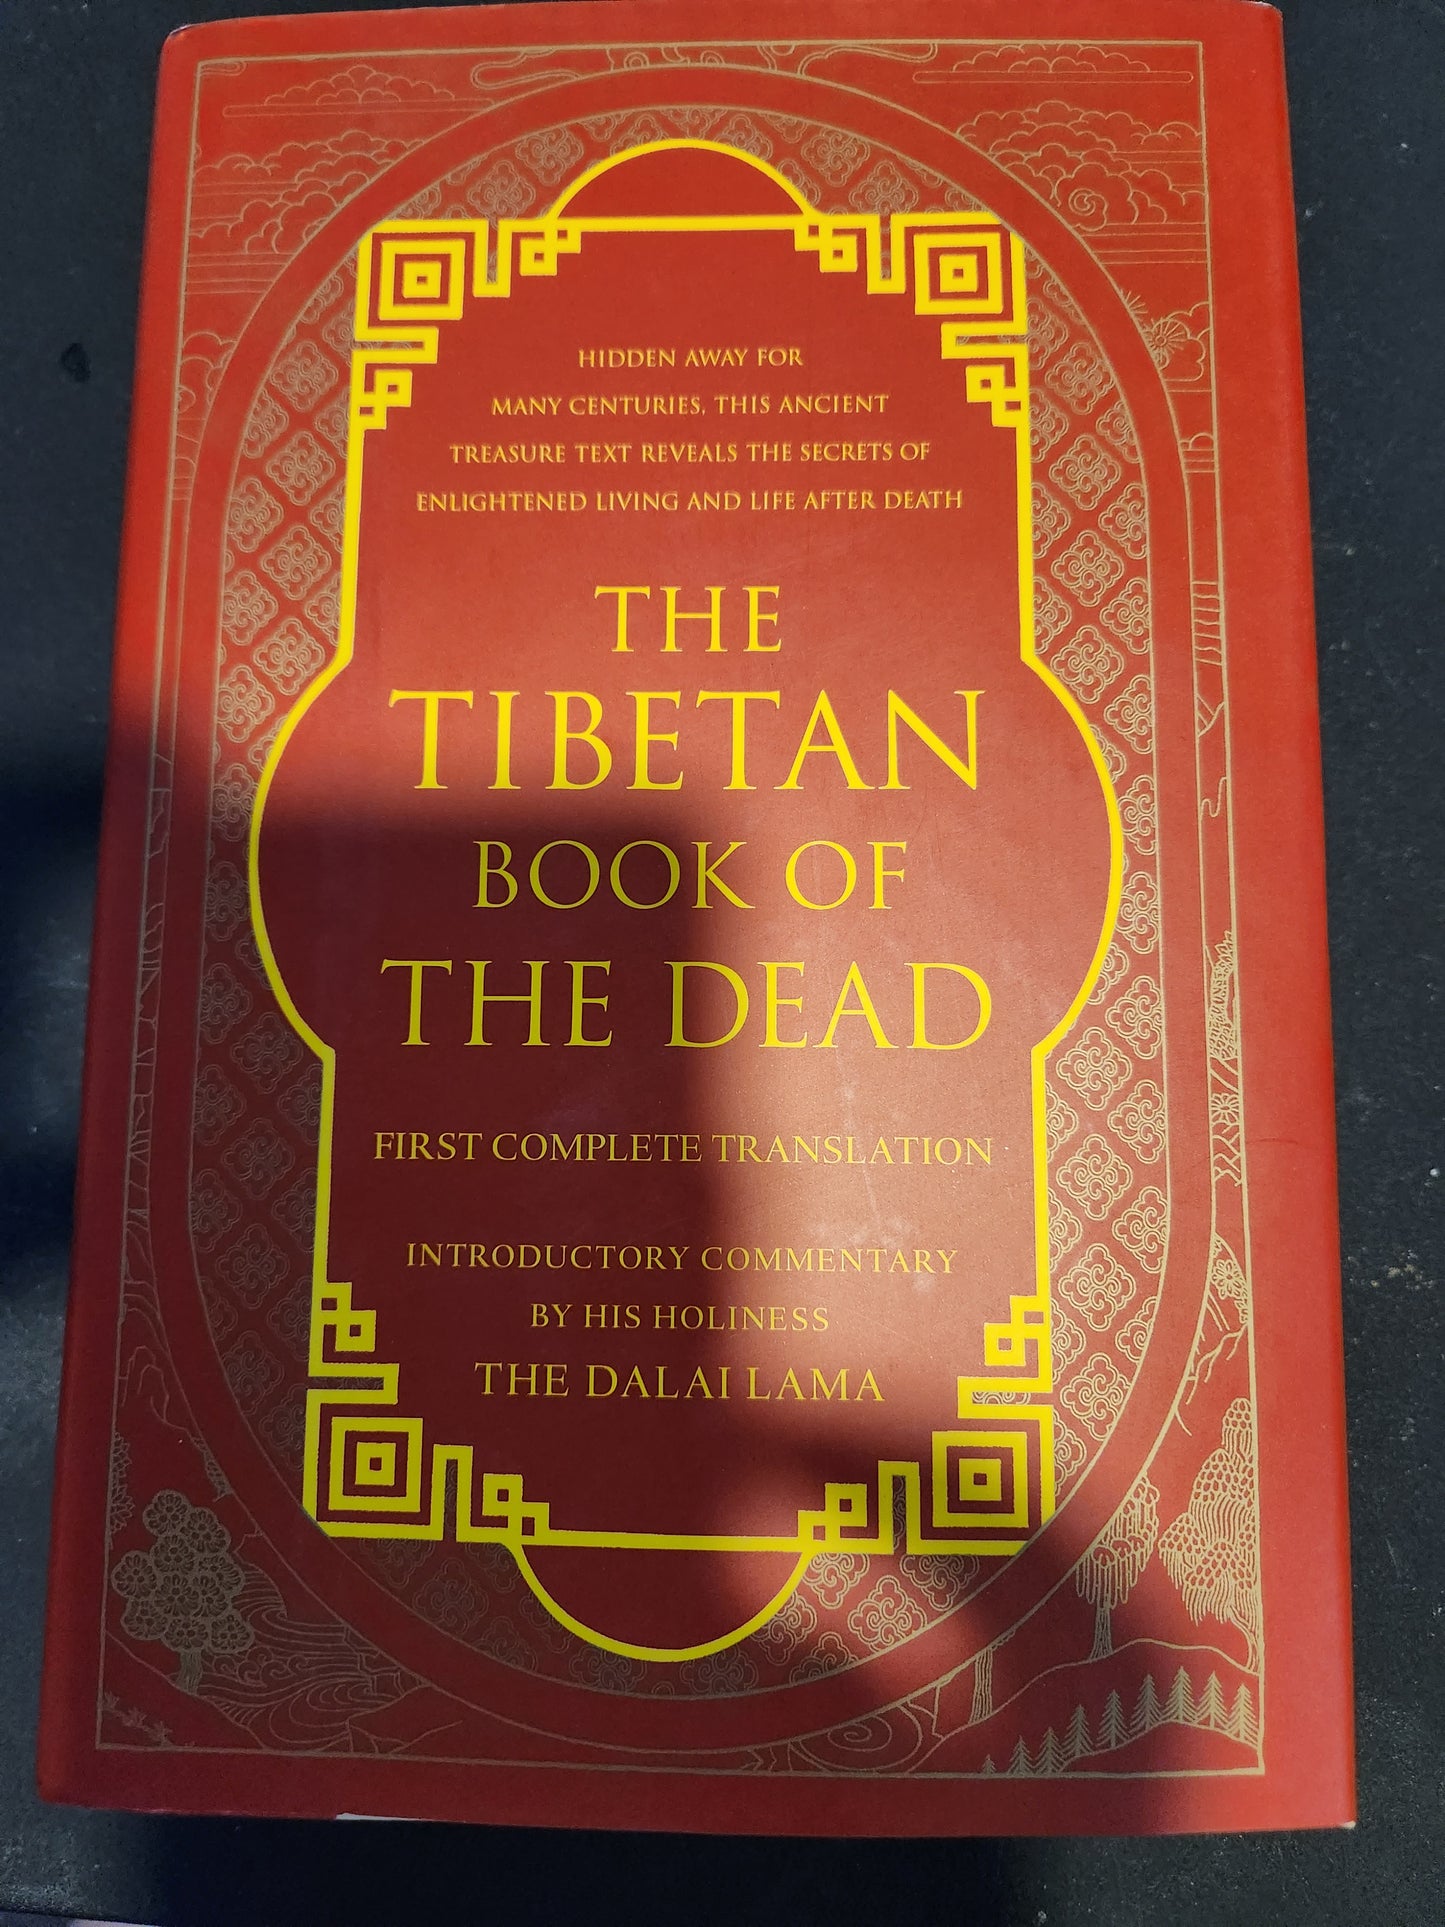 The Tibetan Book of the Dead: First Complete Translation, Hardcover, Graham Coleman (Editor), Thupten Jinpa (Editor), & 2 more